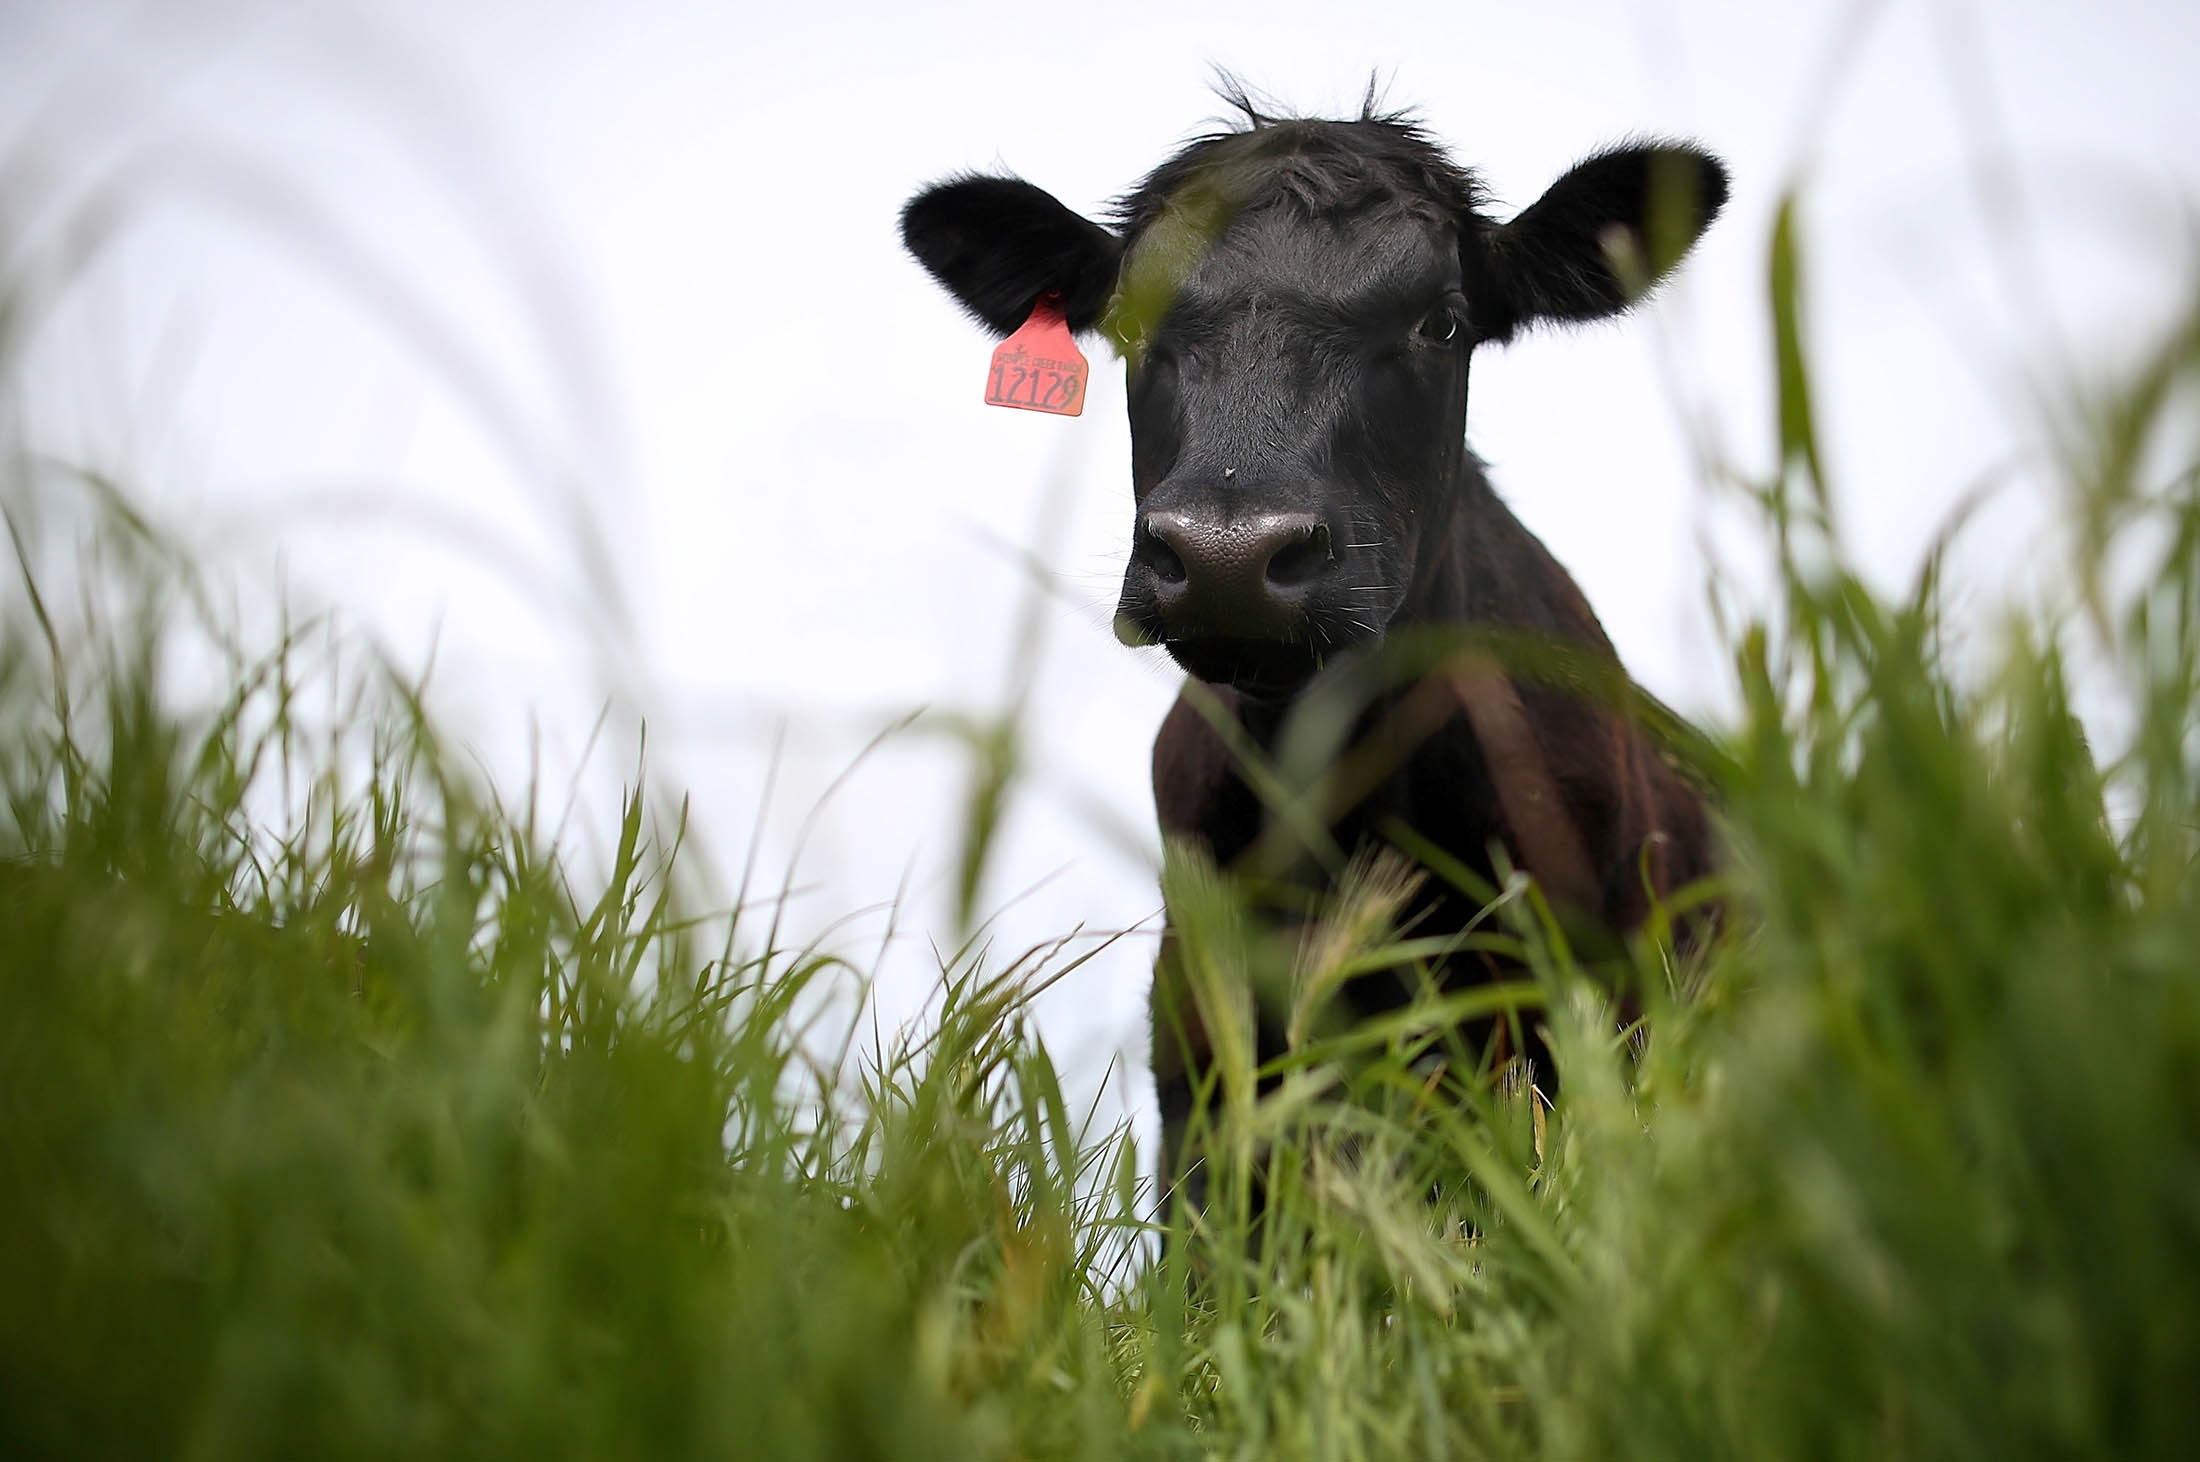 A cow grazes on grass at the Stemple Creek Ranch in Tomales, California.
